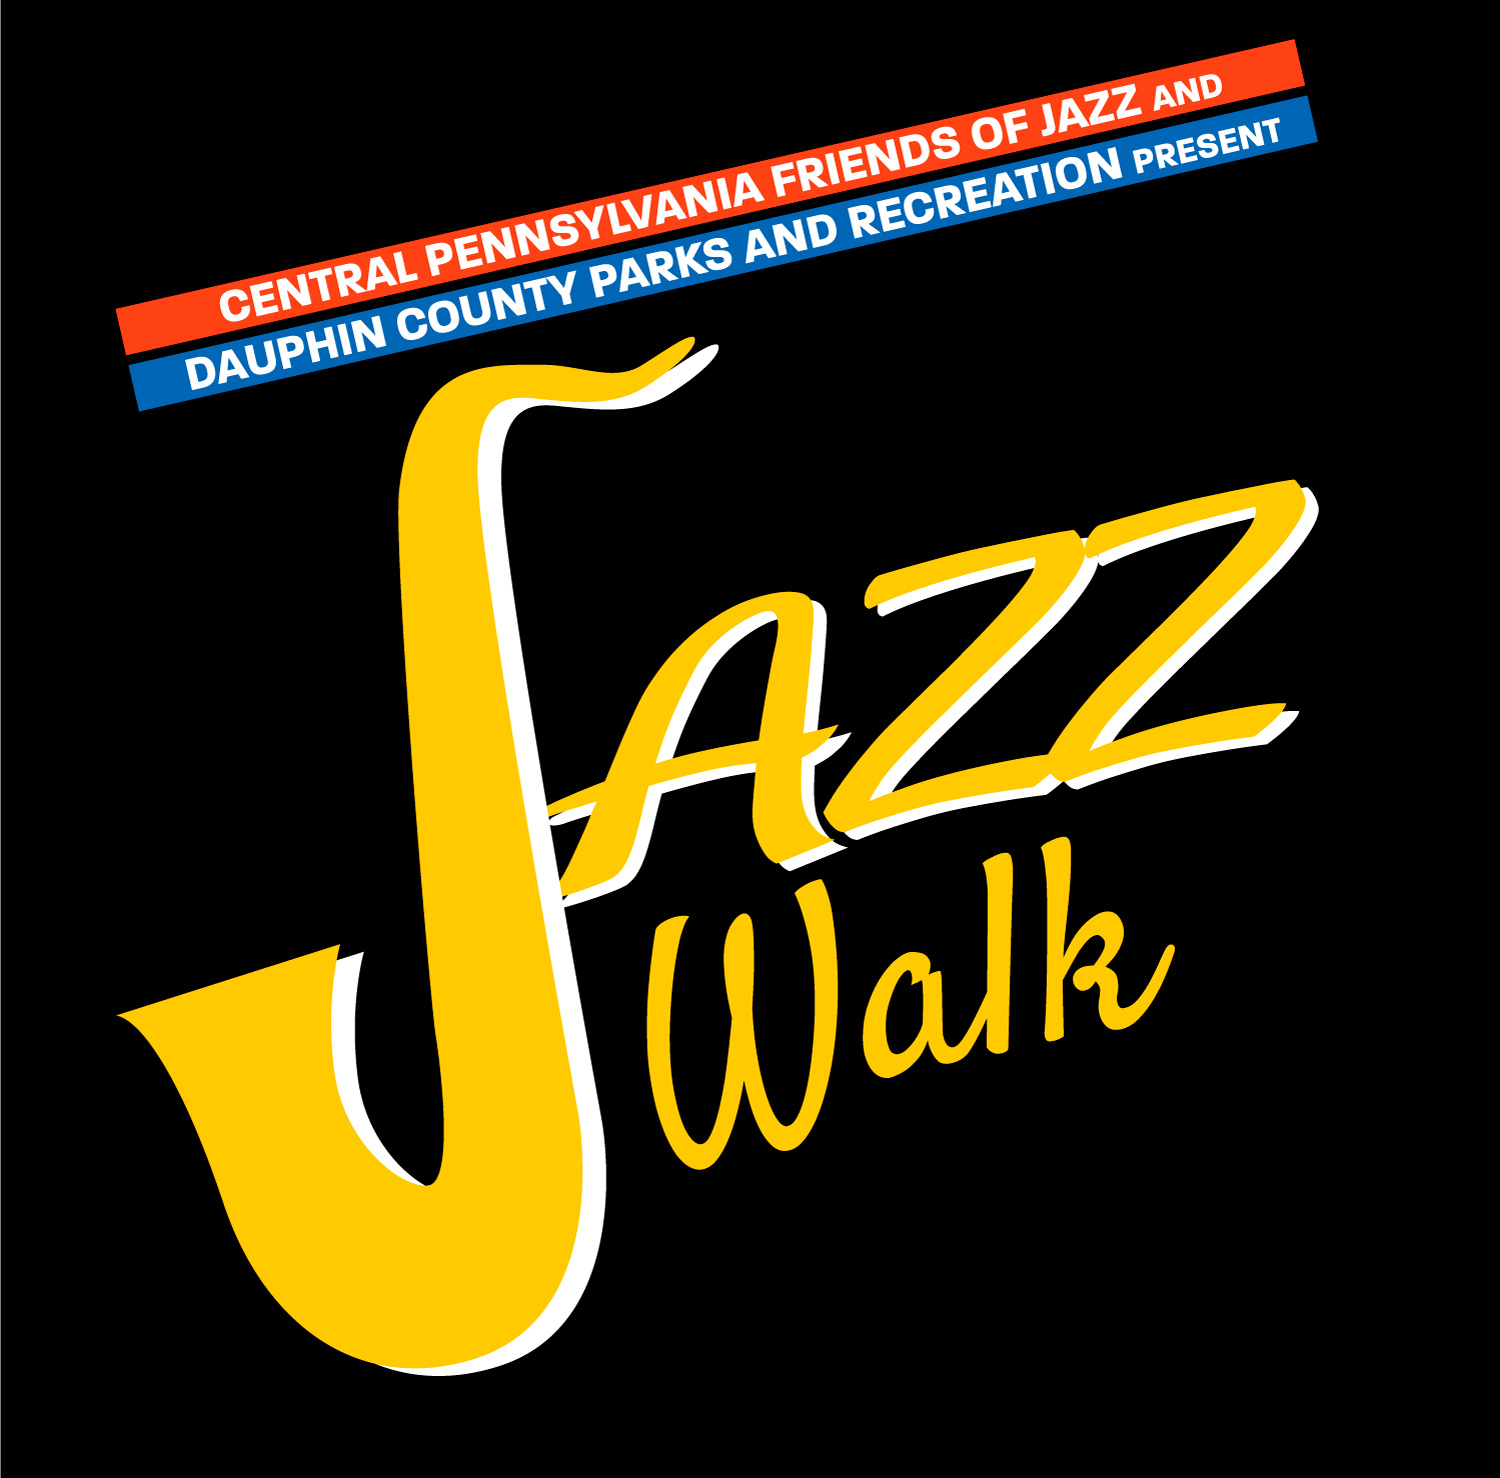 Dauphin County Parks and Recreation Jazz Walk